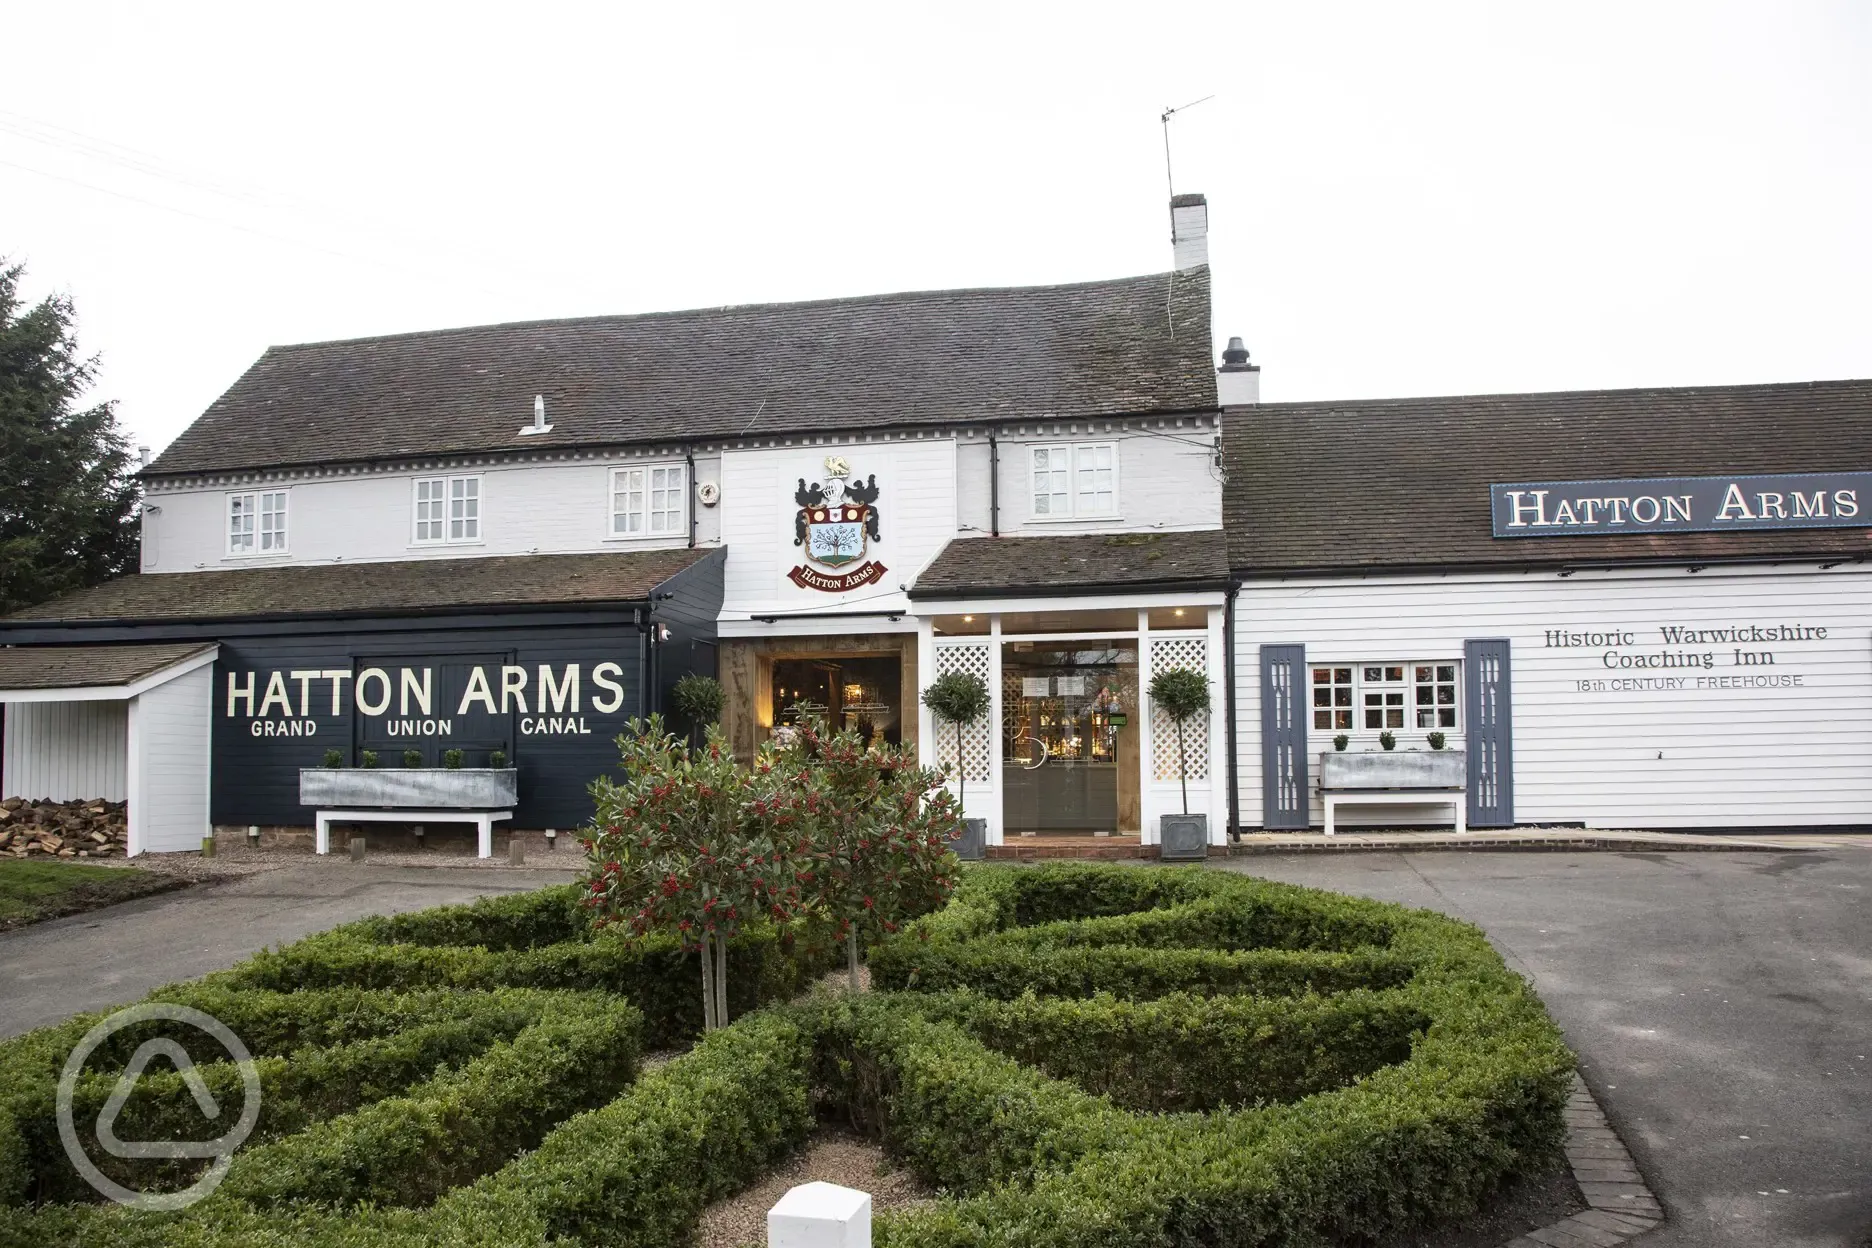 Hatton Arms onsite country pub